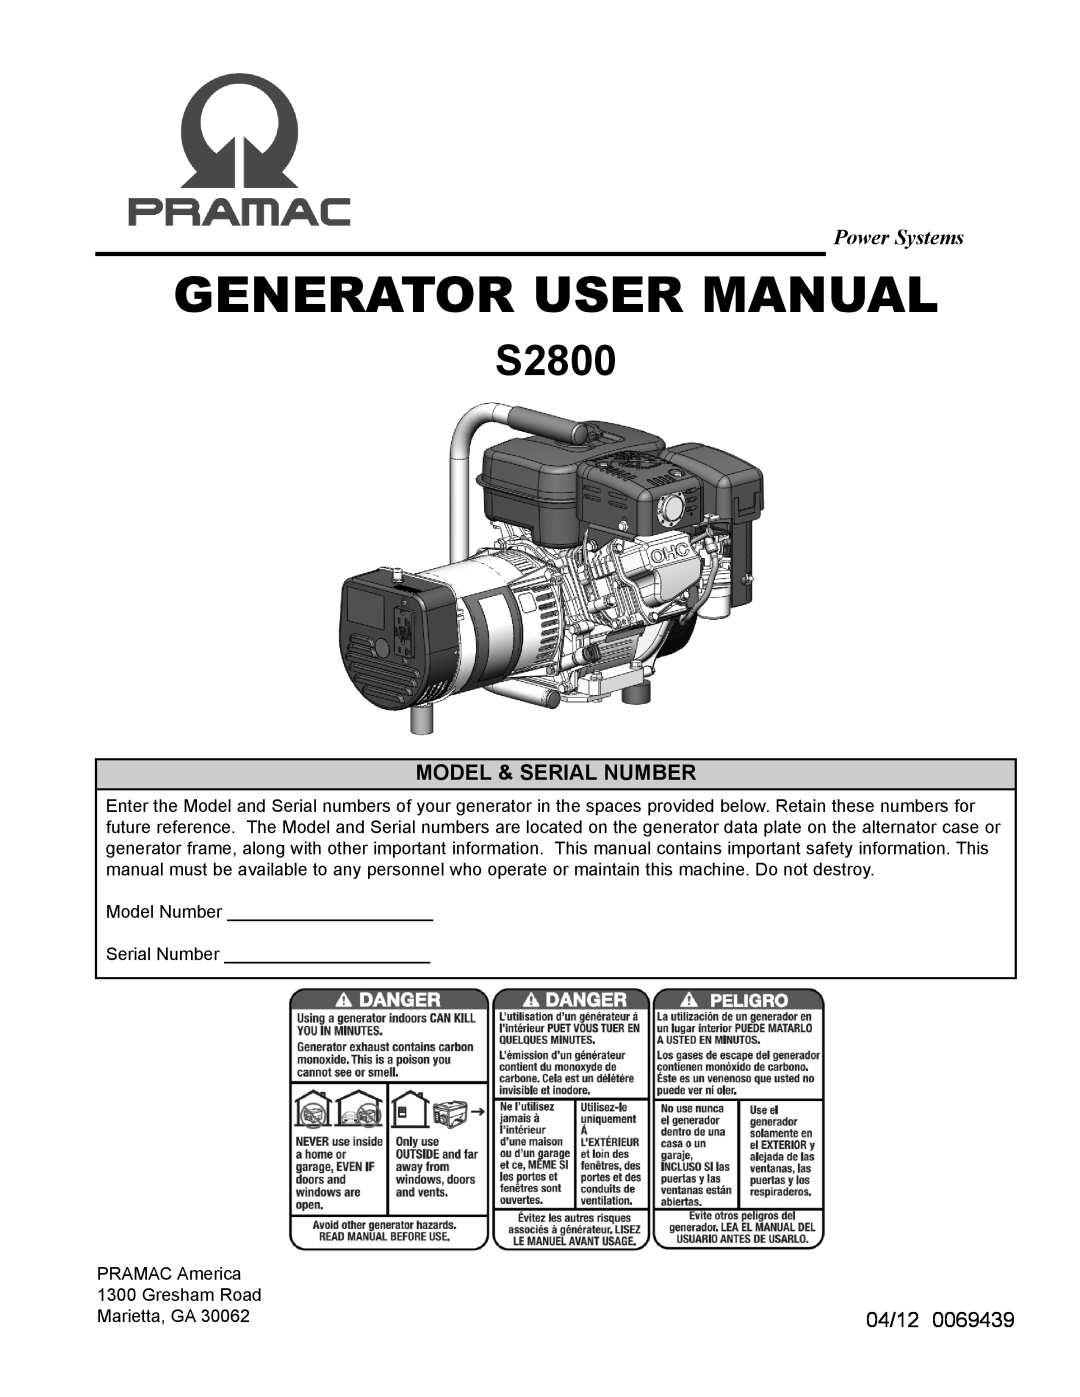 Sears S2800 user manual Model & Serial Number, Power Systems, 04/12 